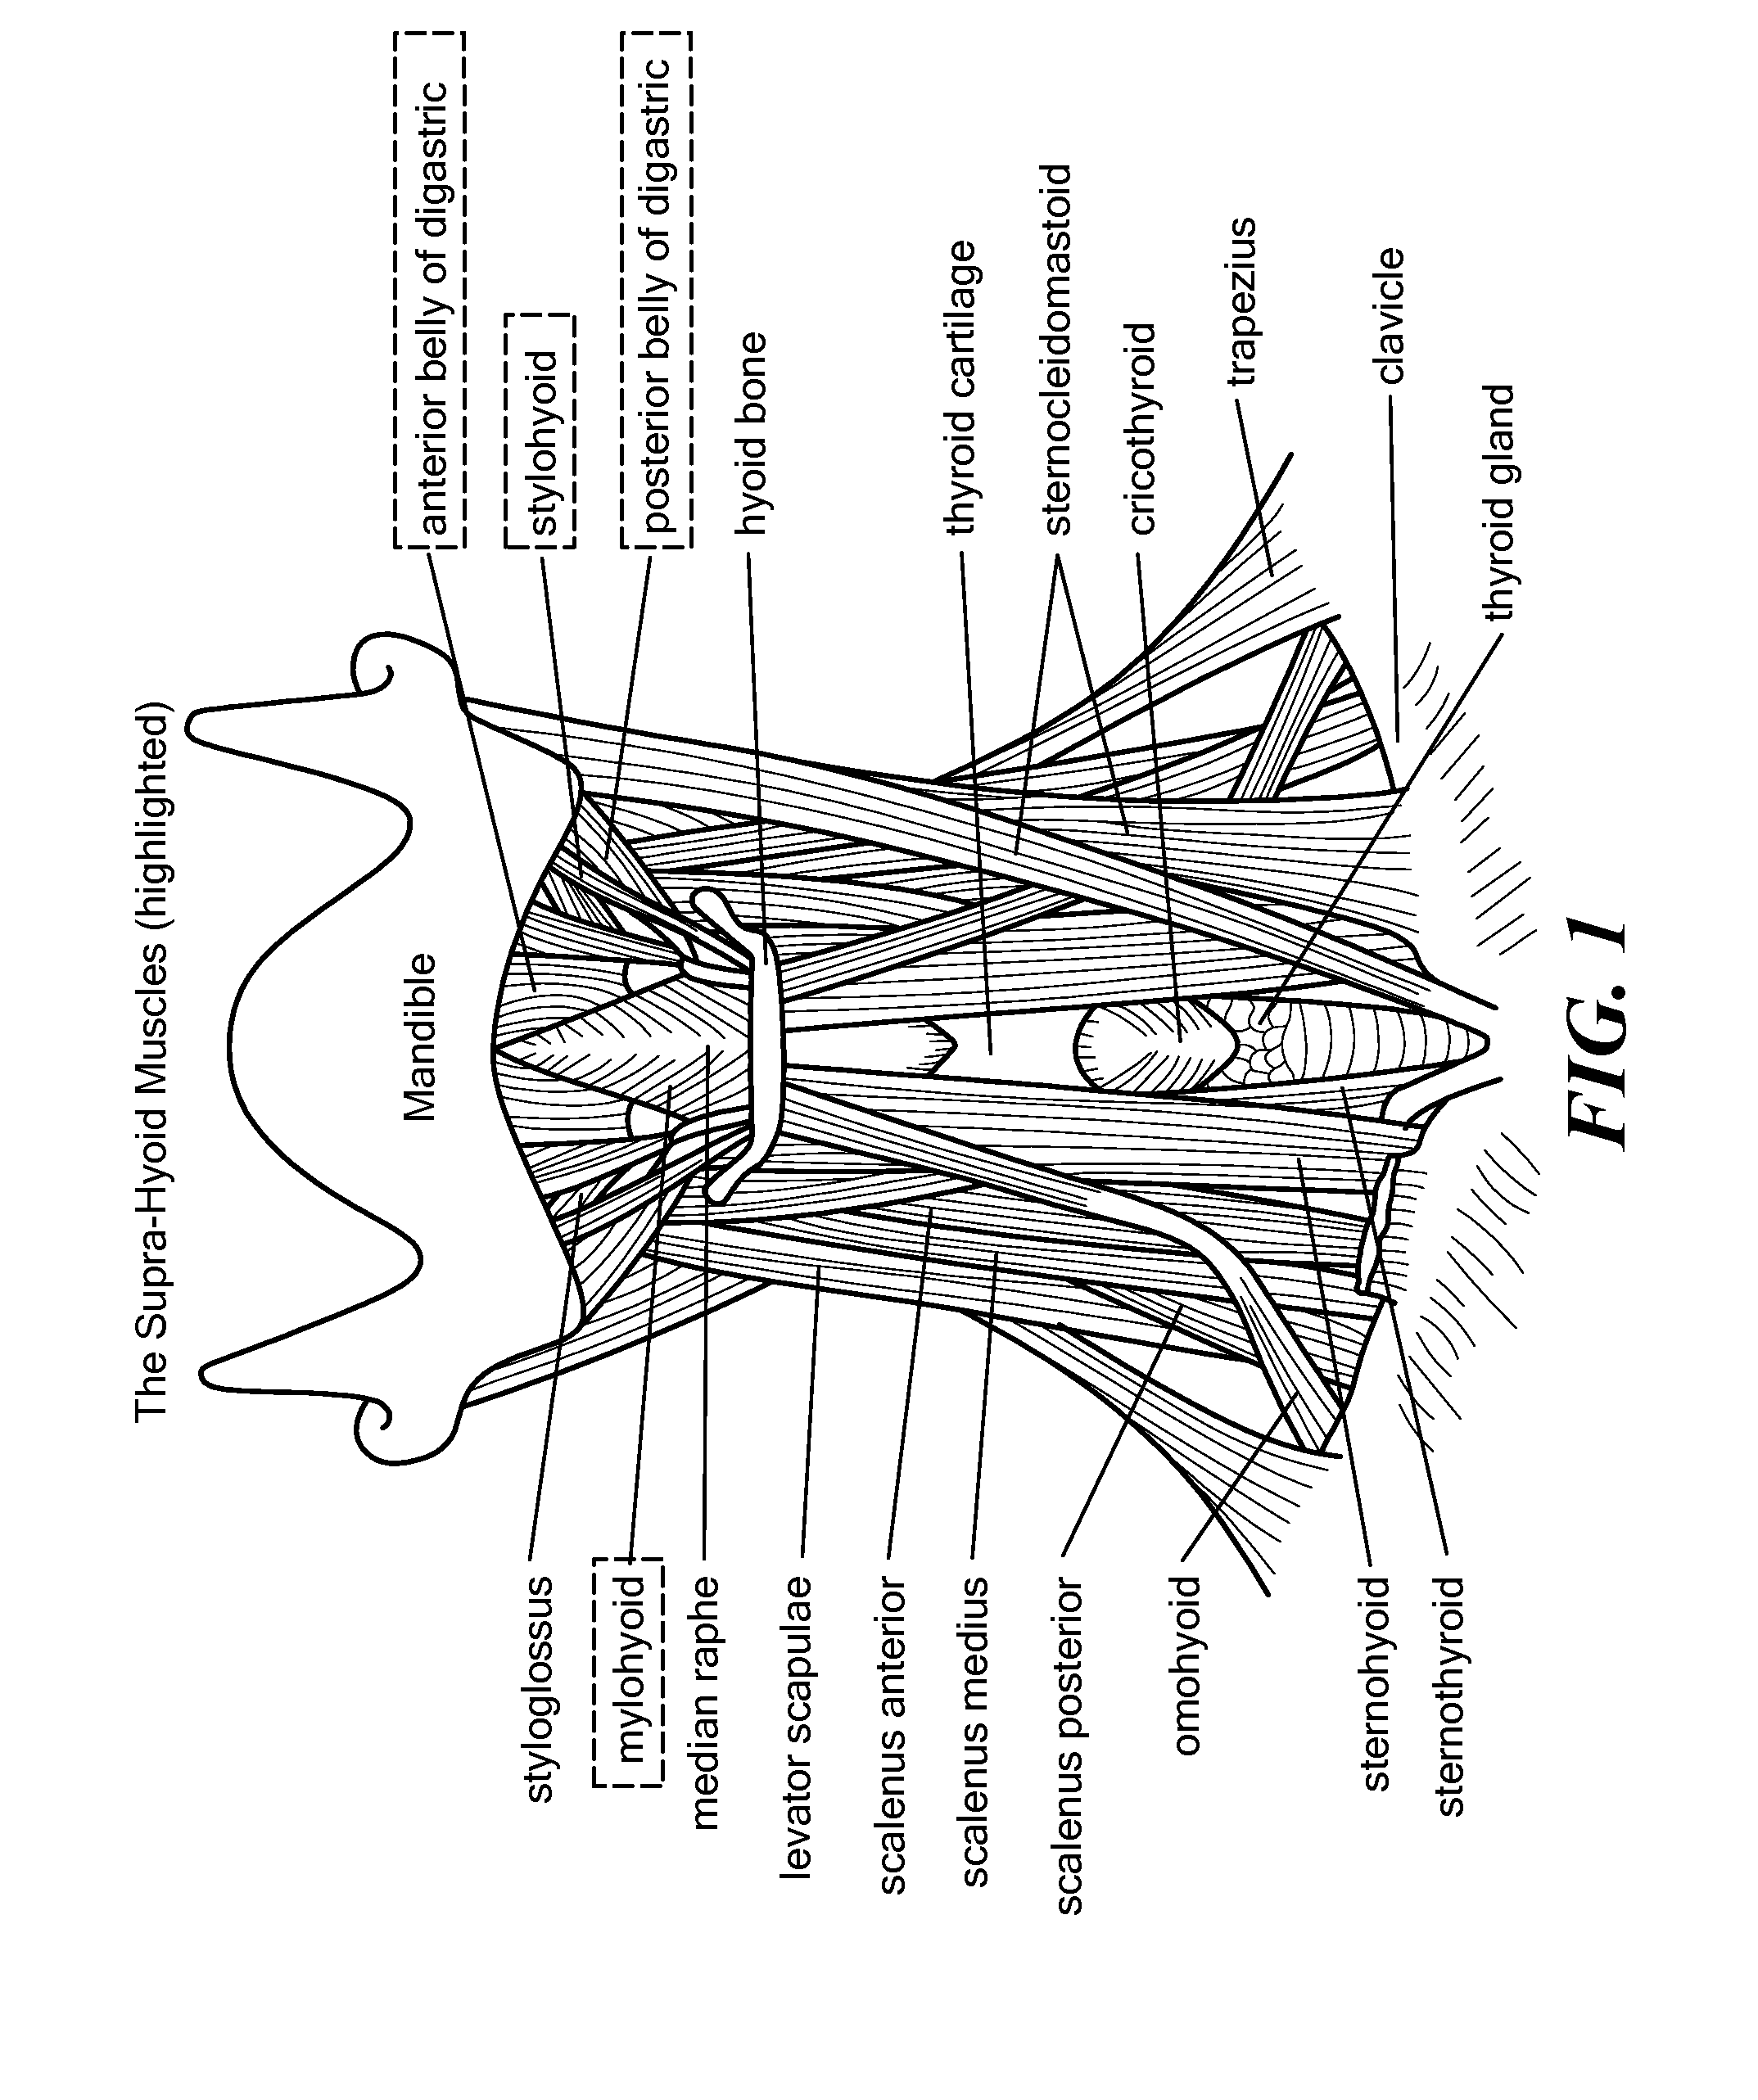 Method for Modifying Larynx Position by Trans-Positioning Muscle and Electrode Stimulation